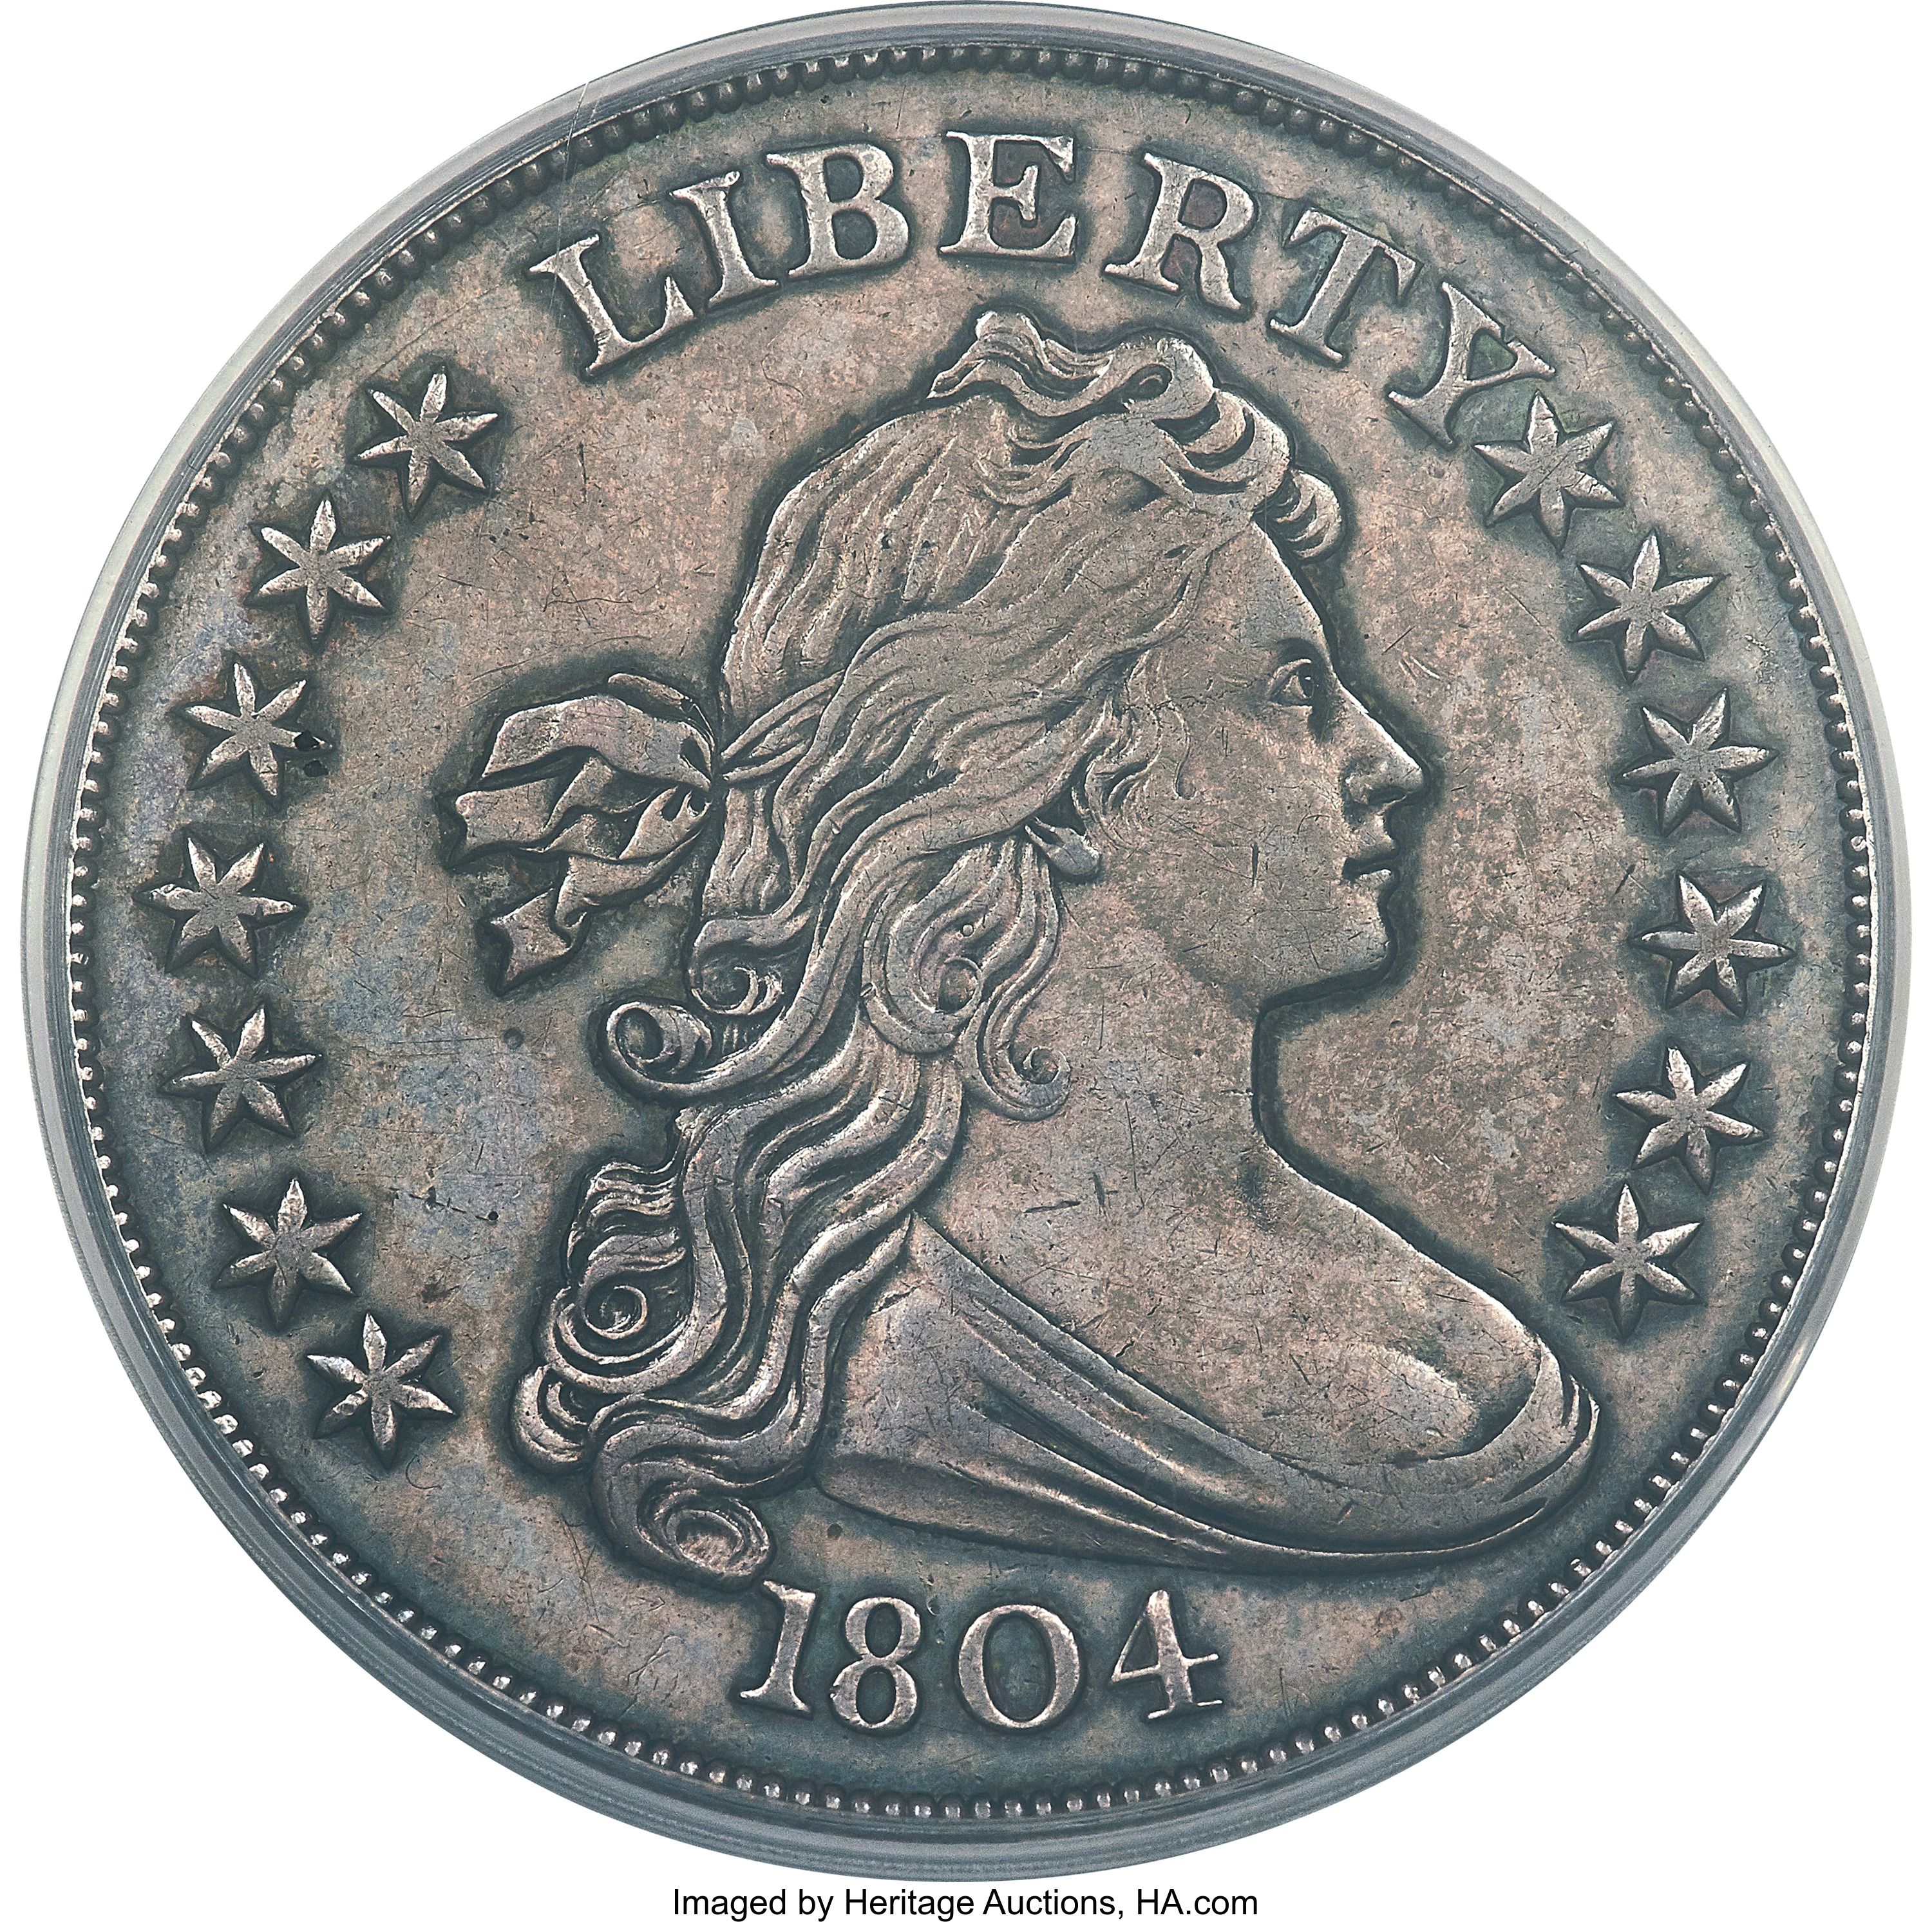 enlarged image for 1804 Draped Bust Dollar Sells for $2.64 Million